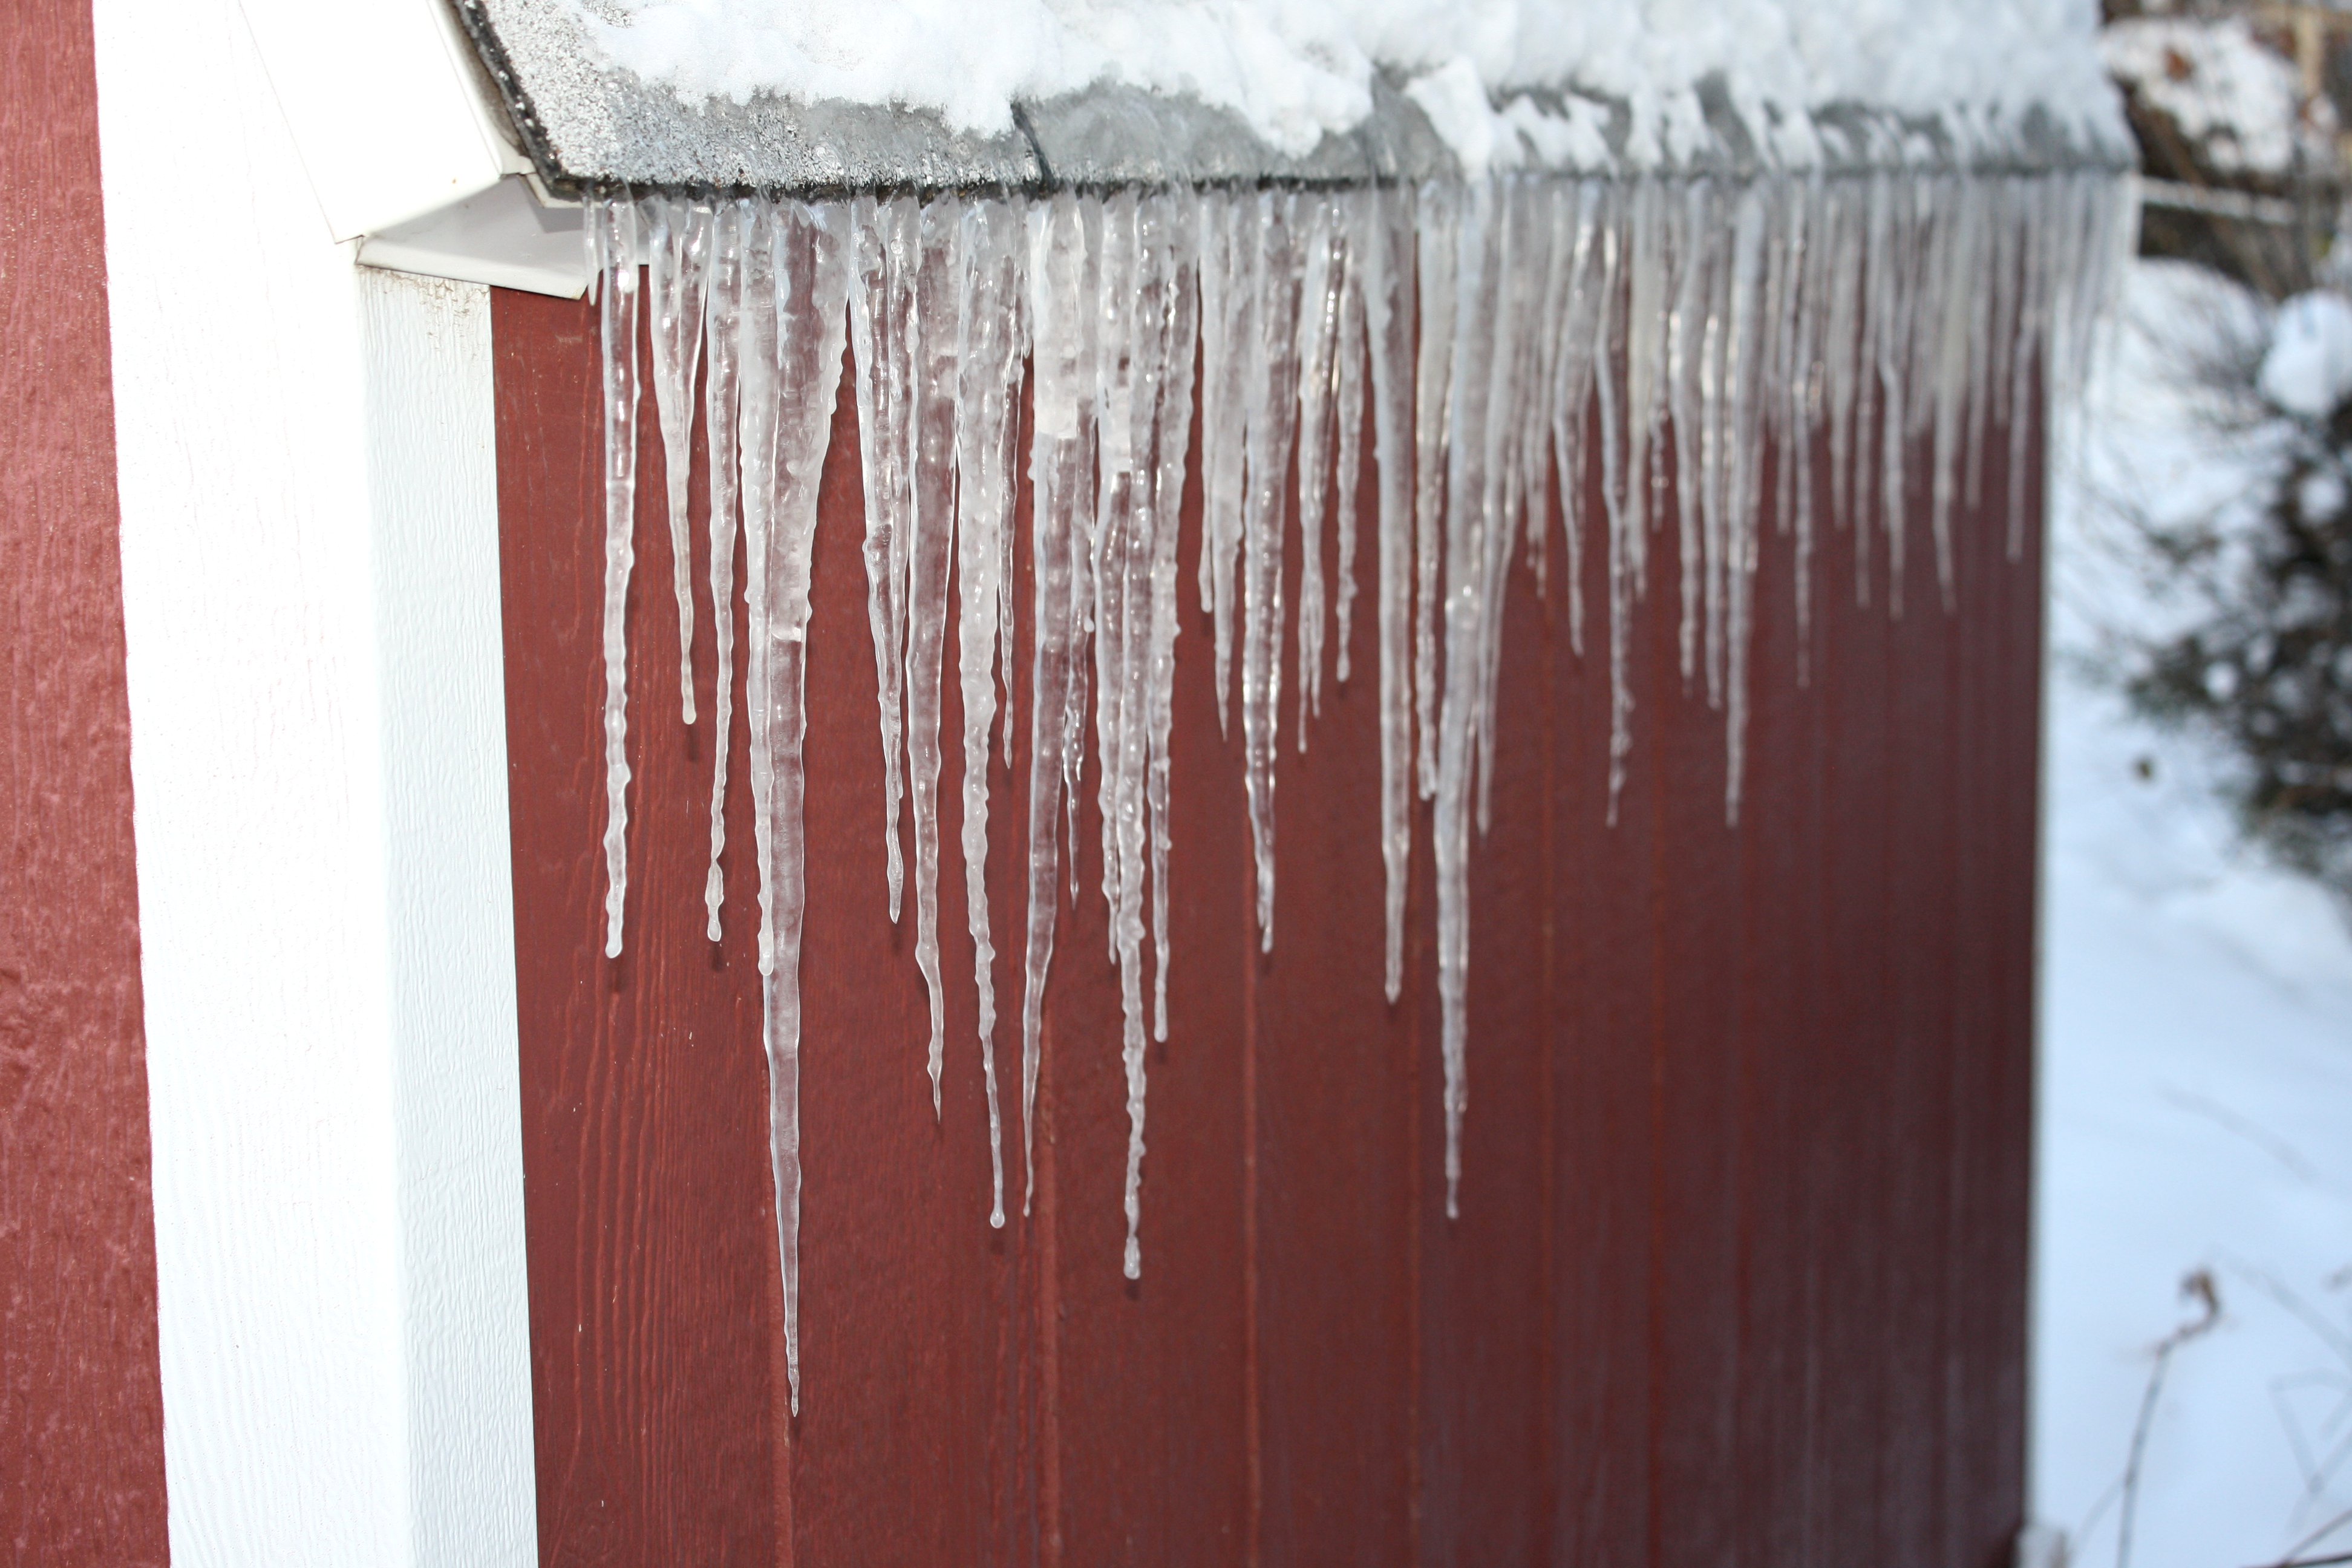 icicle clipart snow roof